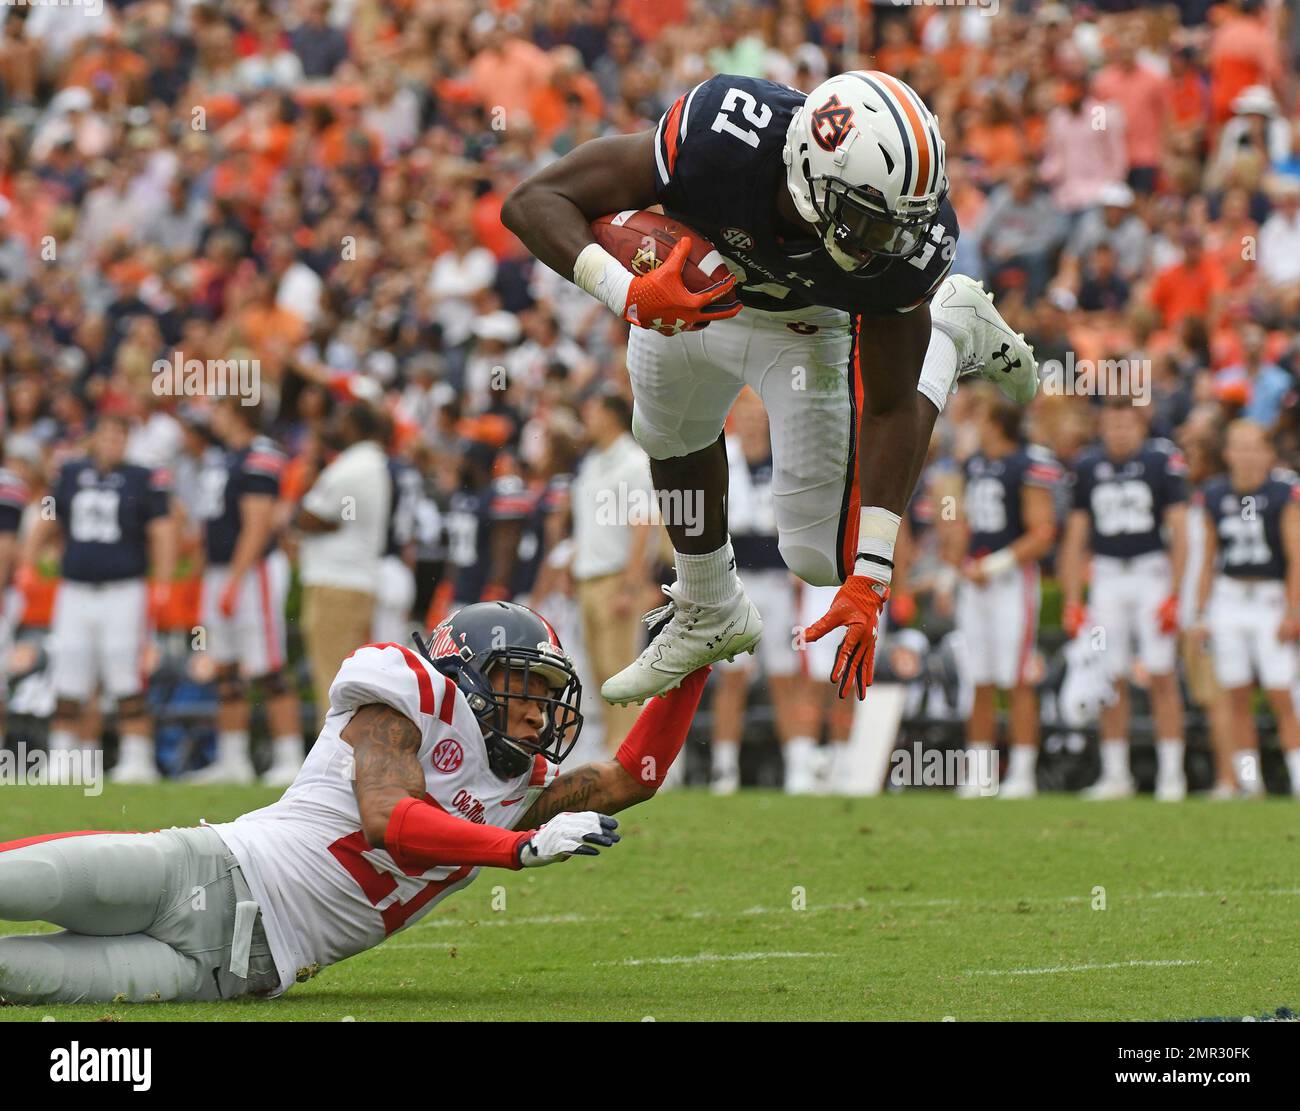 FILE - In this Oct. 7, 2017, file photo, Mississippi defensive back Javien  Hamilton (21) trips up Auburn running back Kerryon Johnson (21) during the  first half of an NCAA college football